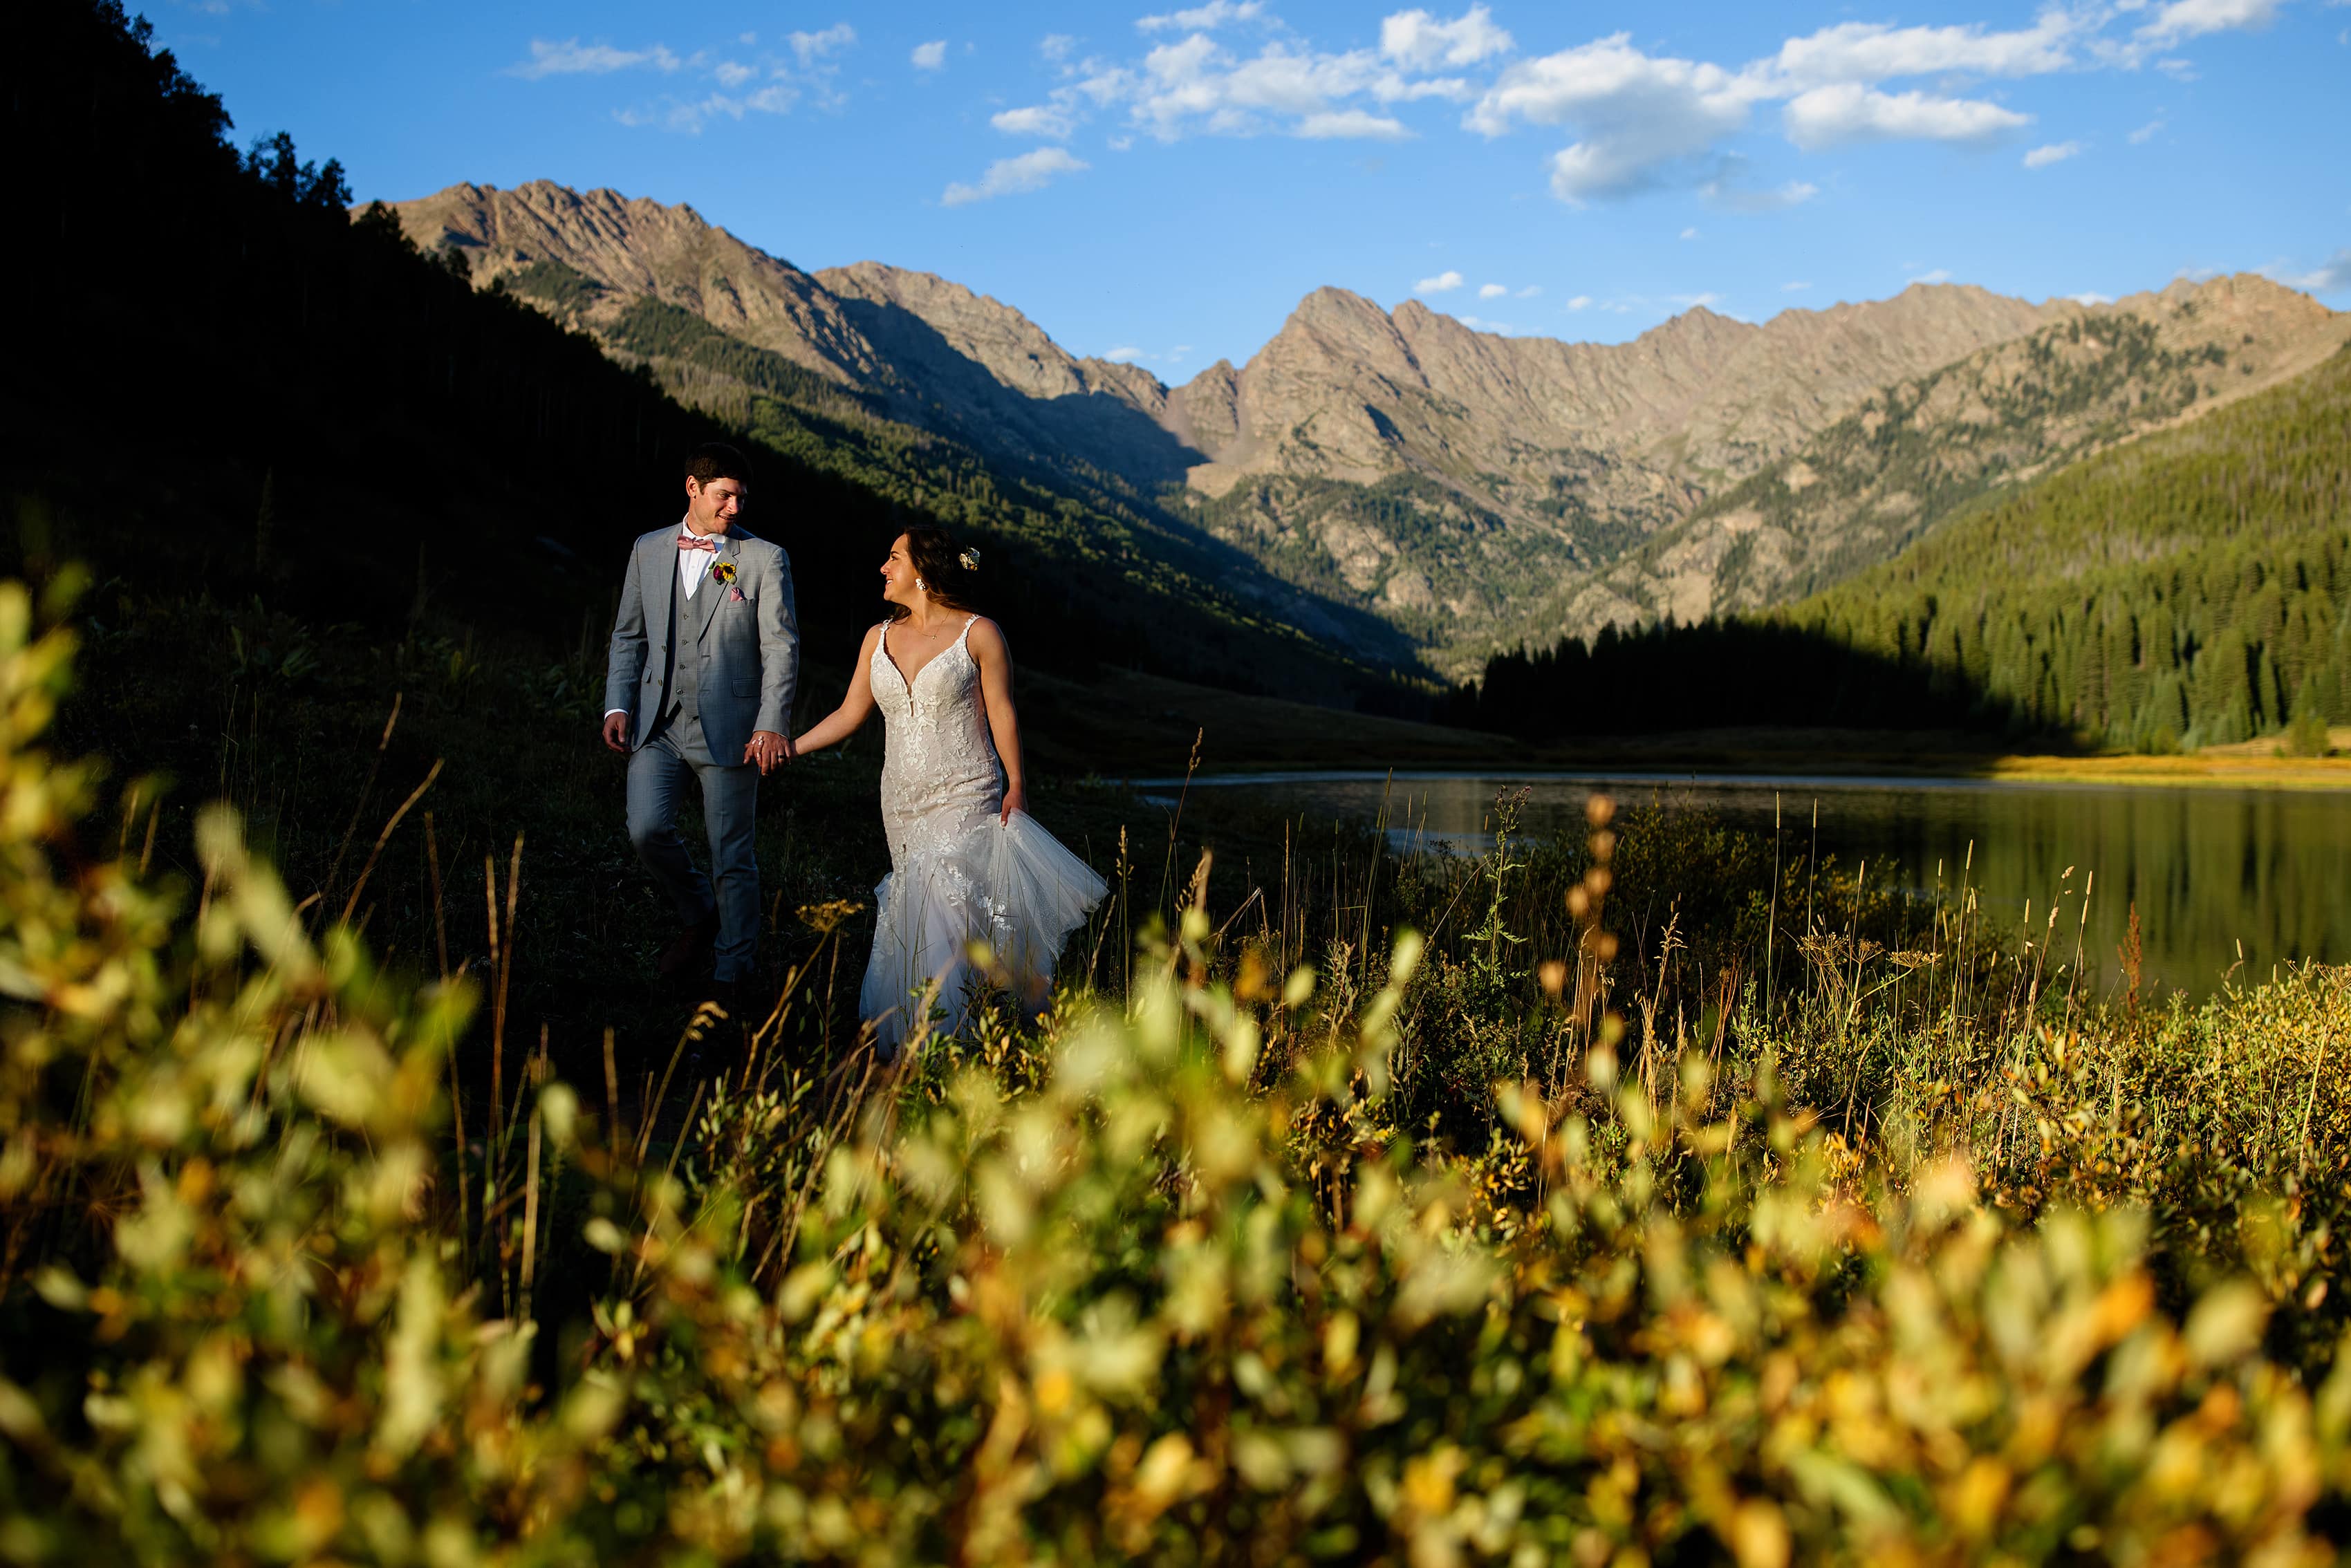 Danielle and Gabe walk along the path near Piney Lake during their wedding day